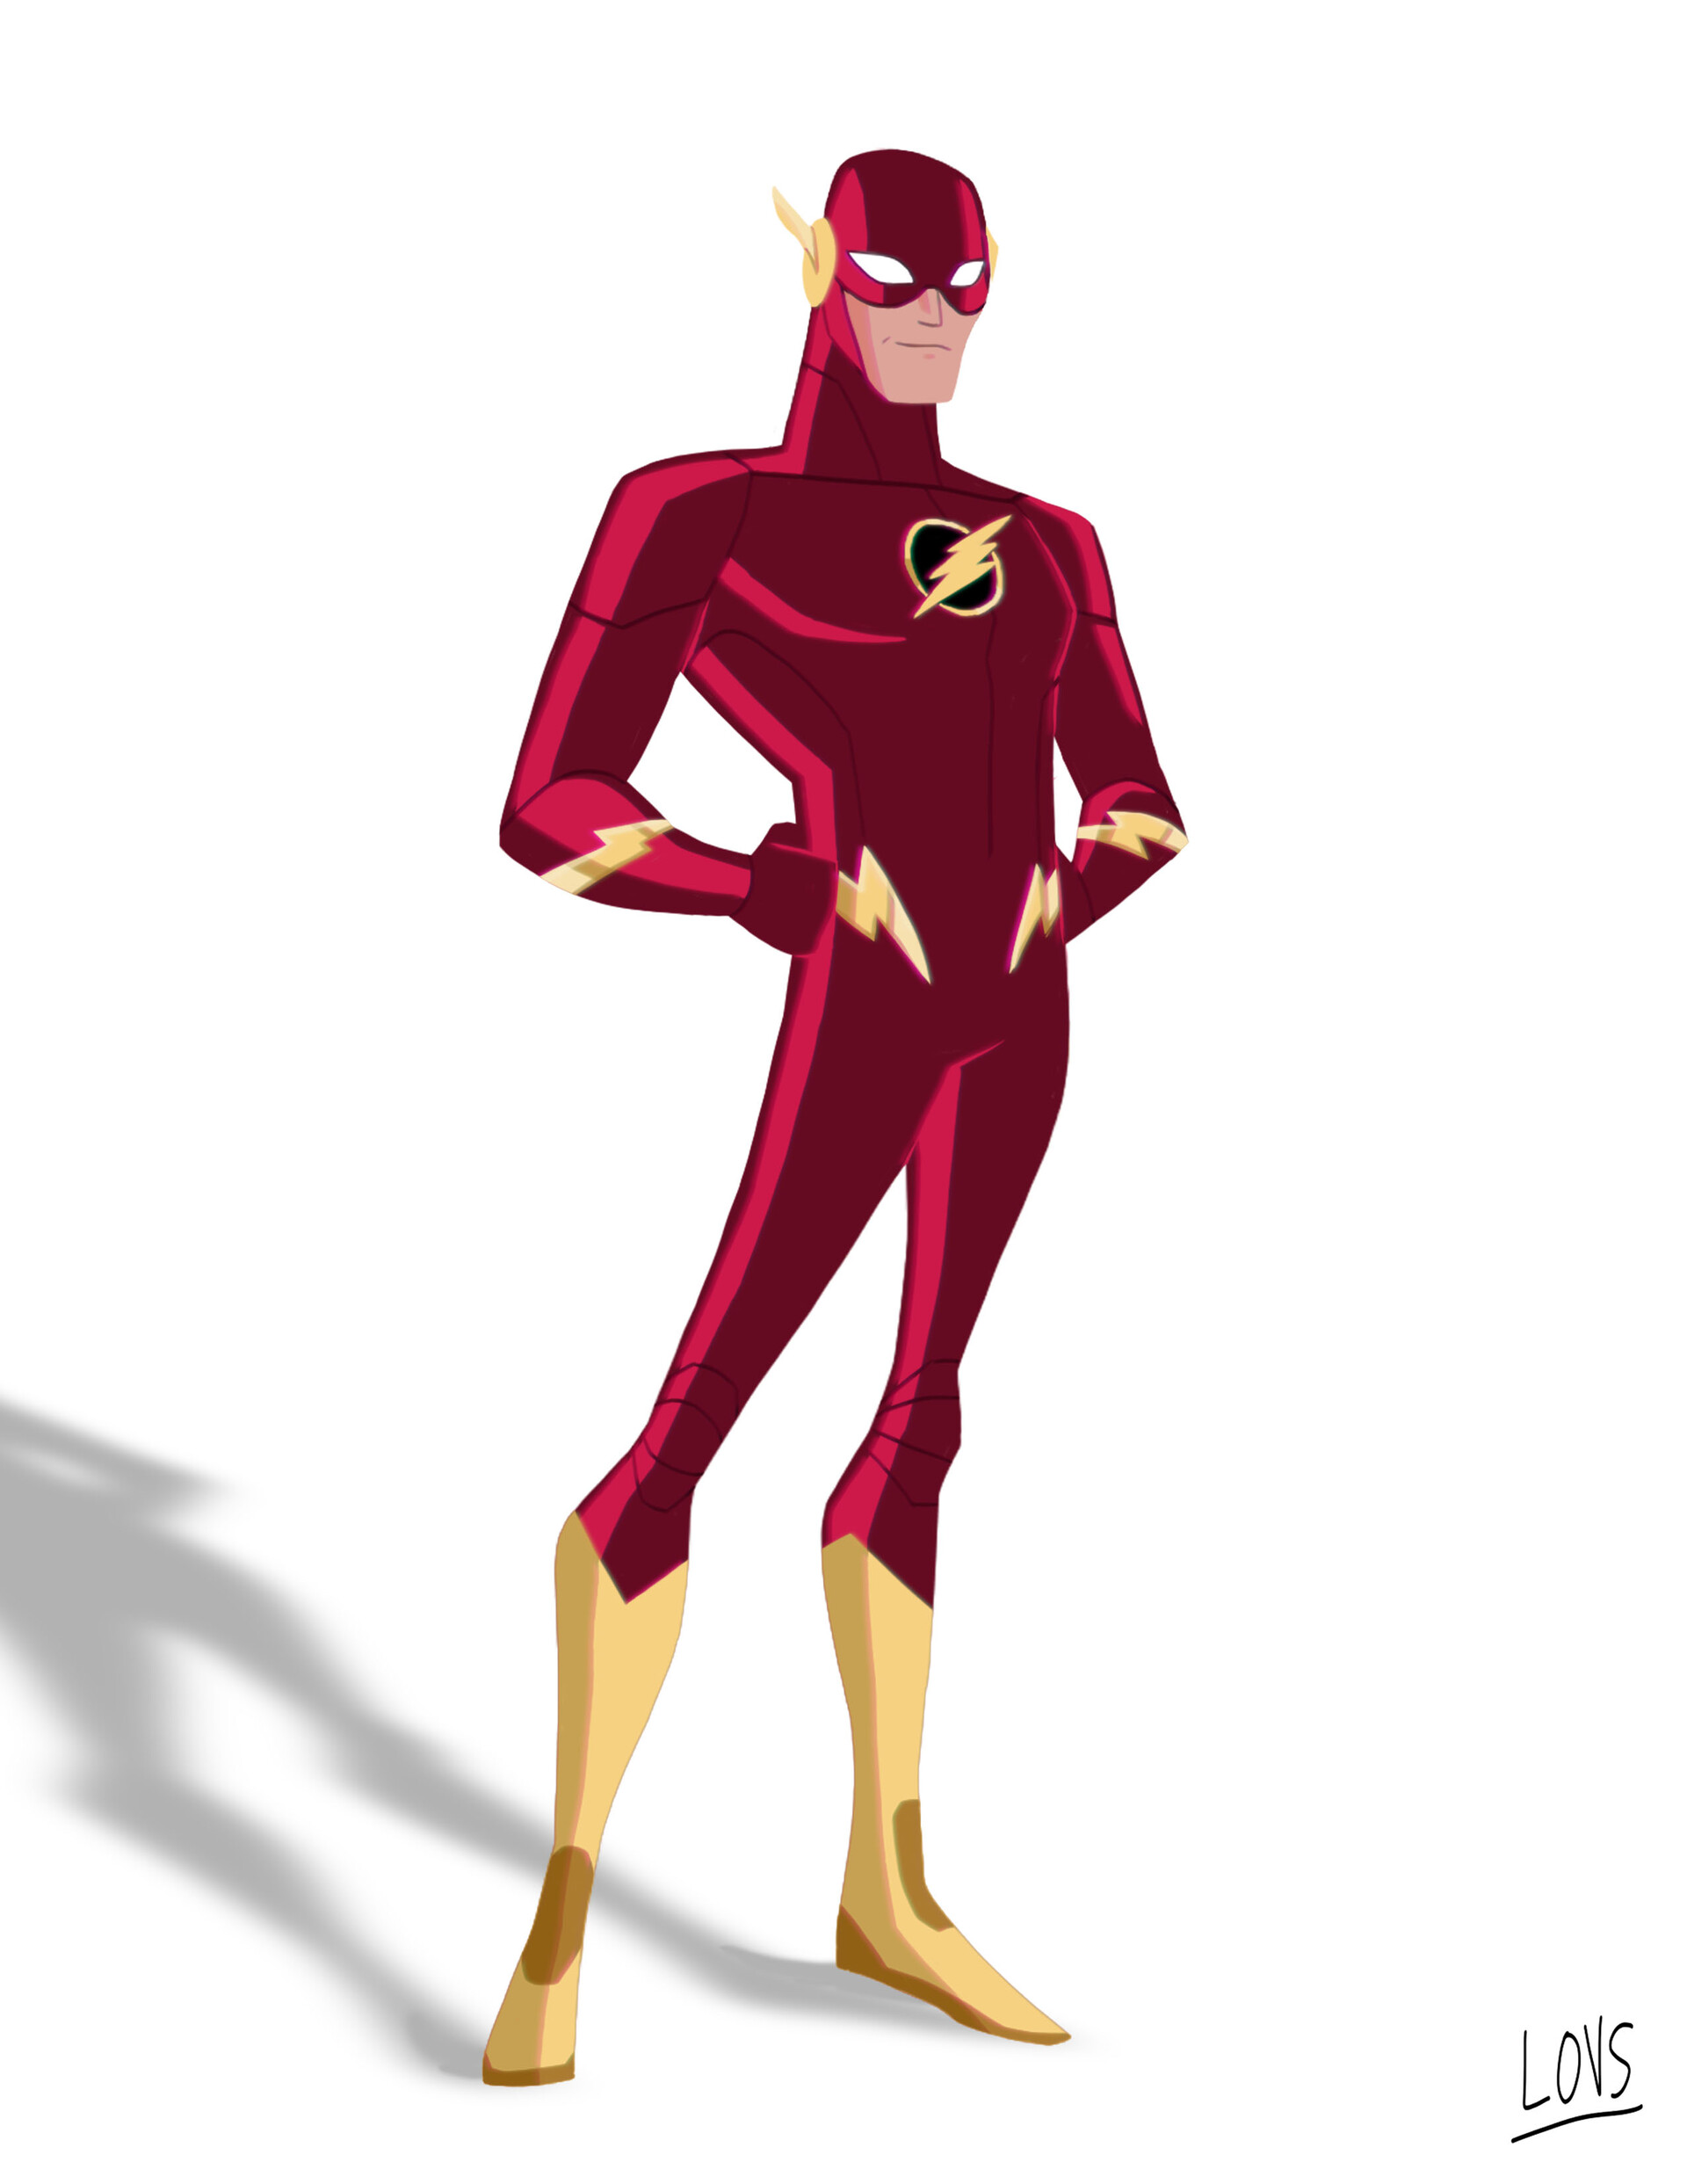 ArtStation - The Flash - DC Animated Pitch